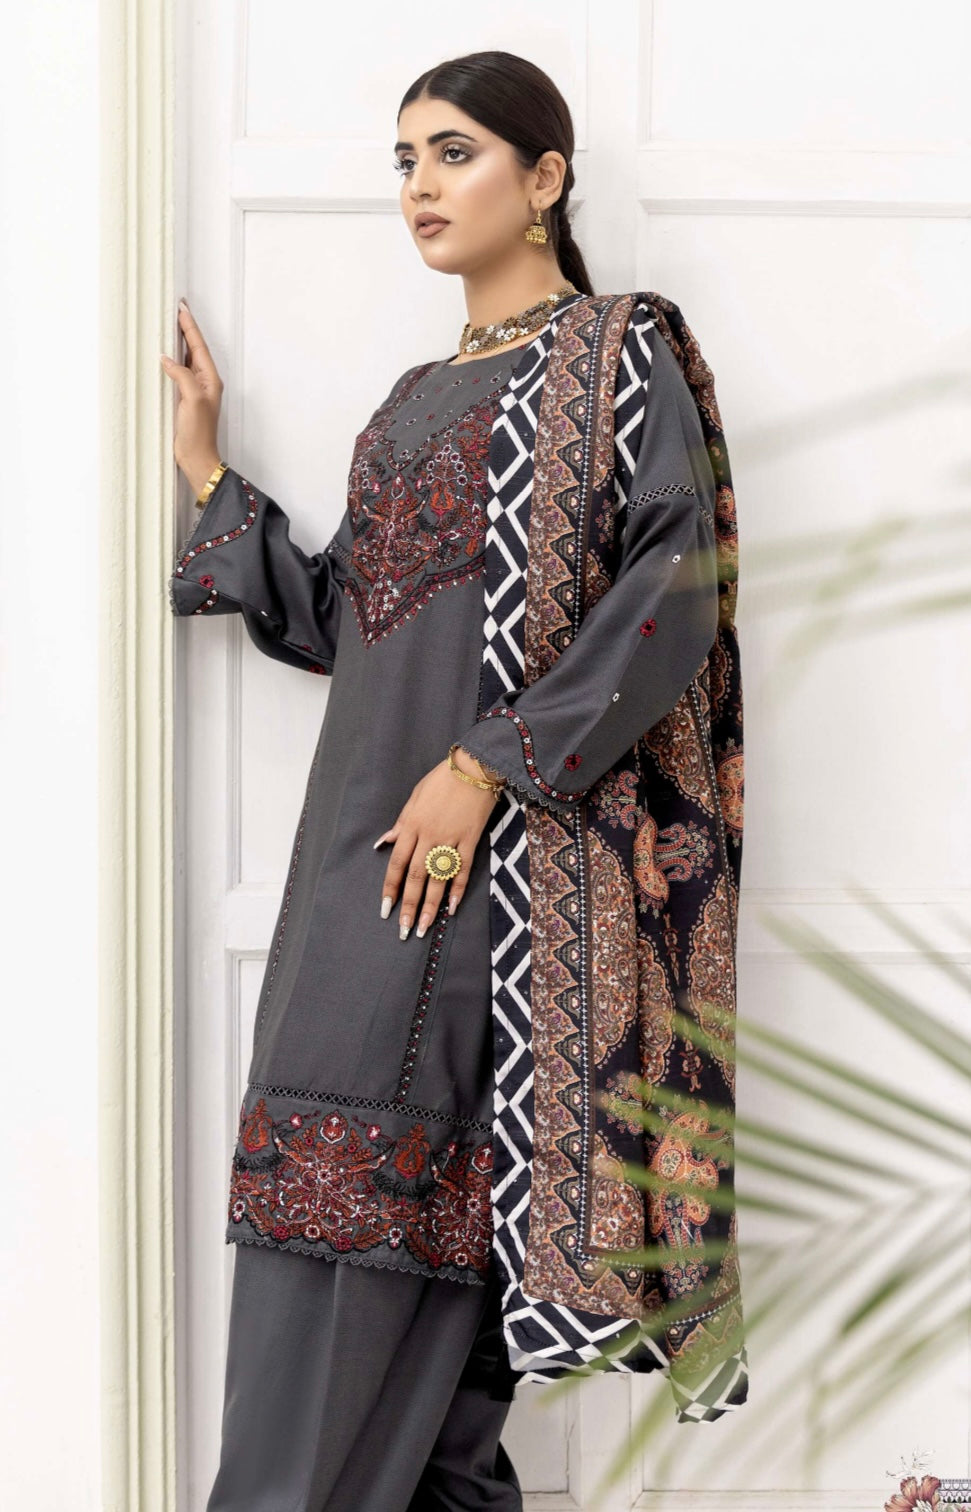 SIMRANS MAHI Dhanak Embroidered 3 Piece Winter Outfit With Shawl MSH04